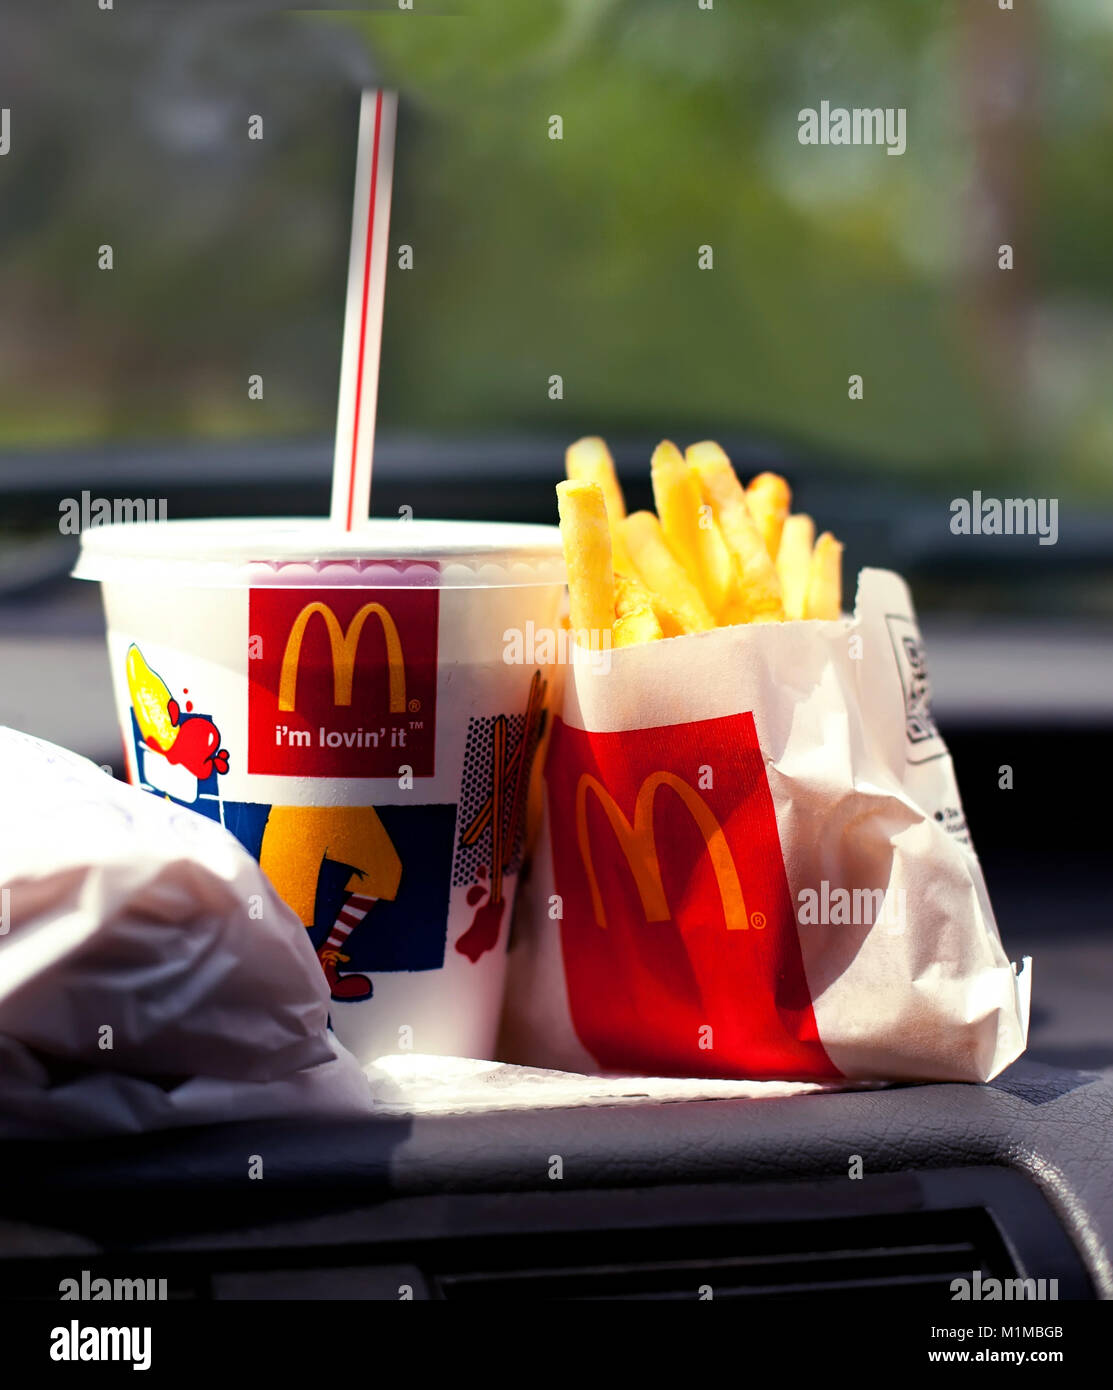 SOFIA, BULGARIA - JUNE 01, 2015: McDonalds Meal on a front of a car, Mcdrive fast food service conceptual background Stock Photo